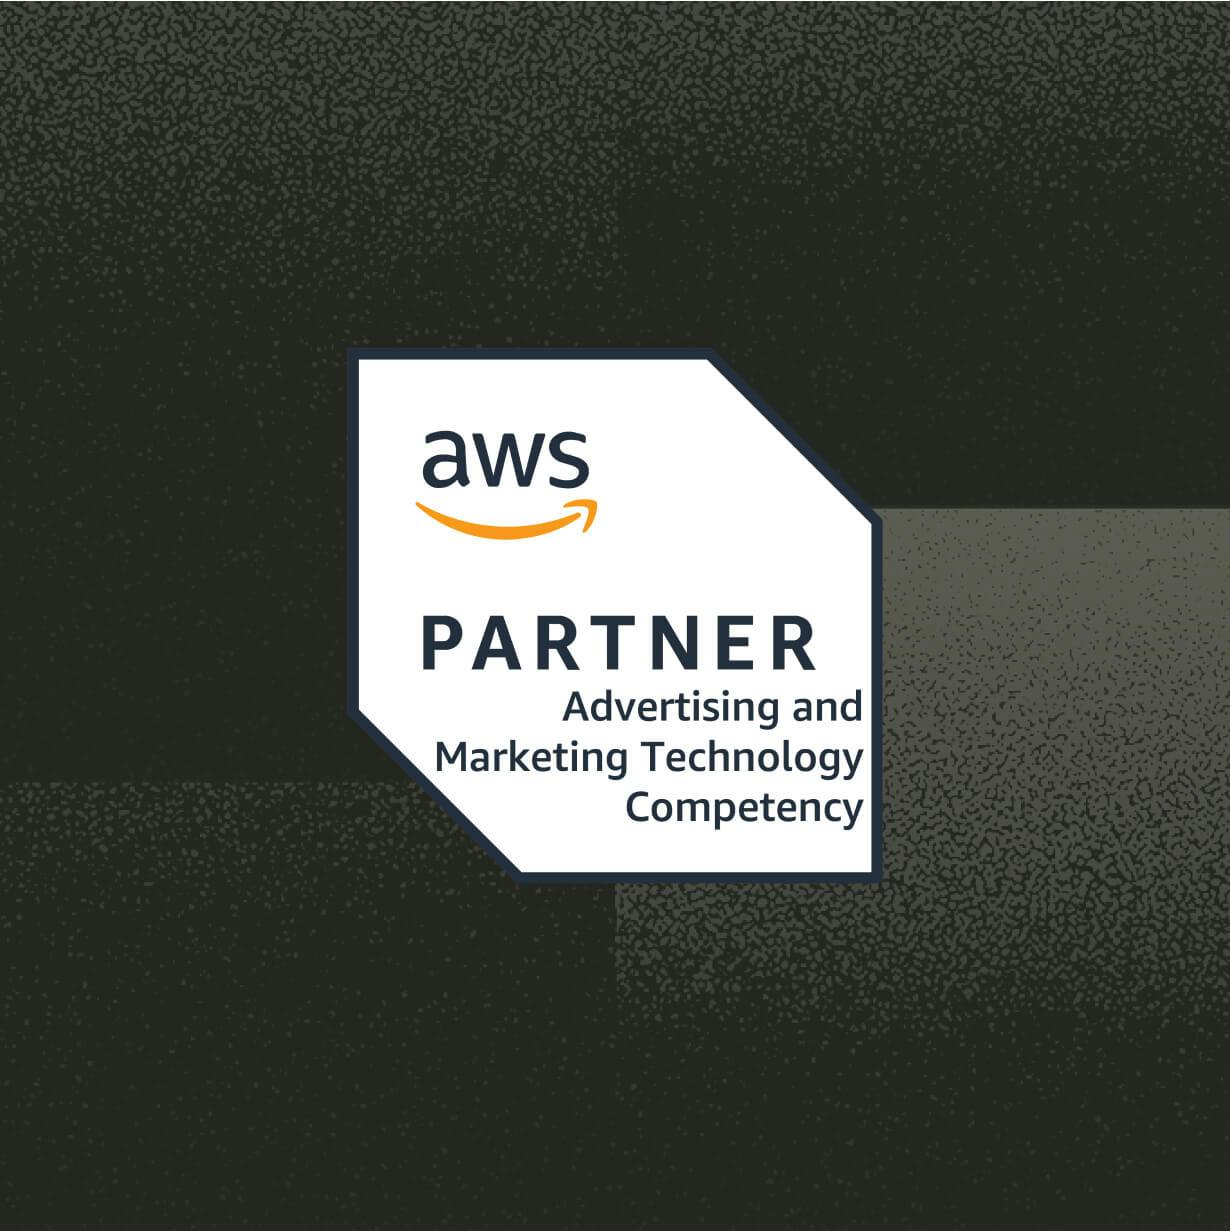 mParticle Joins Elite Ranks with AWS Advertising and Marketing Technology Competency